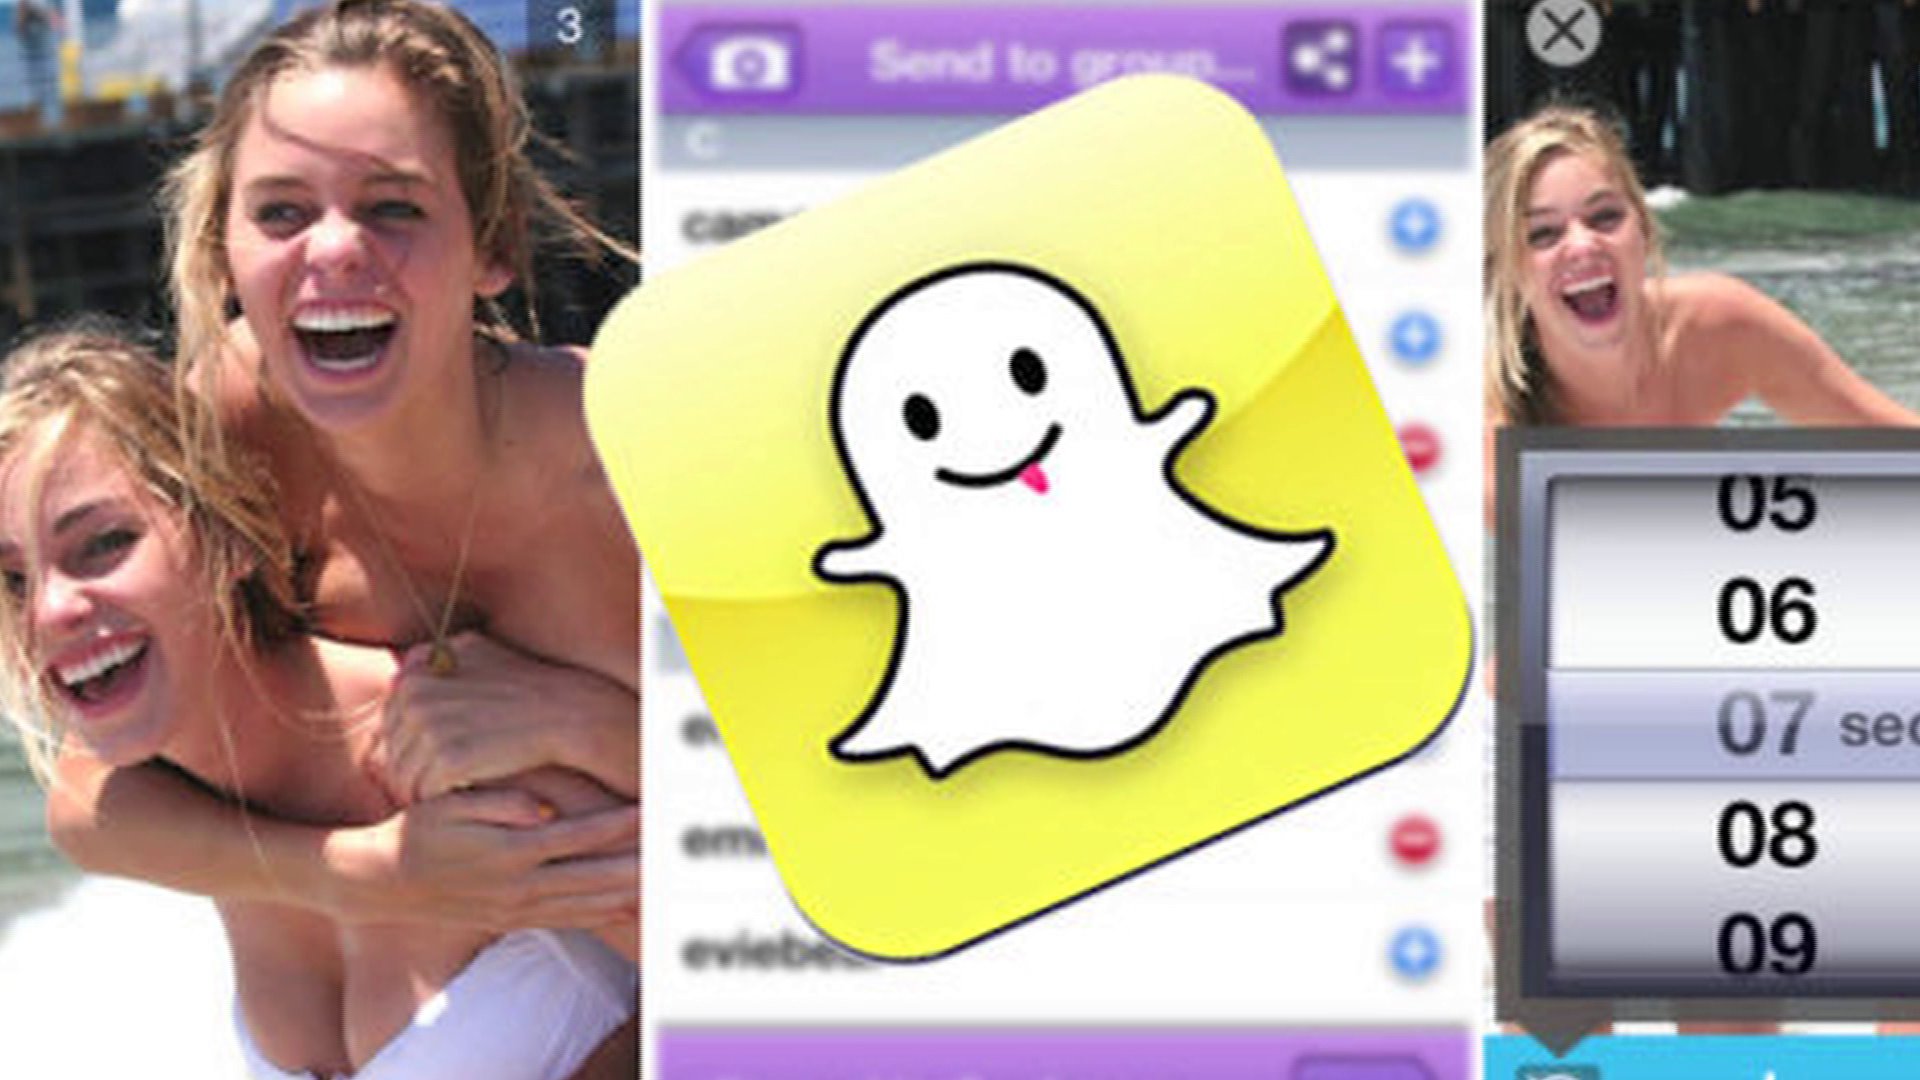 Snapchat was right to spurn Facebook's $3 billion offer.